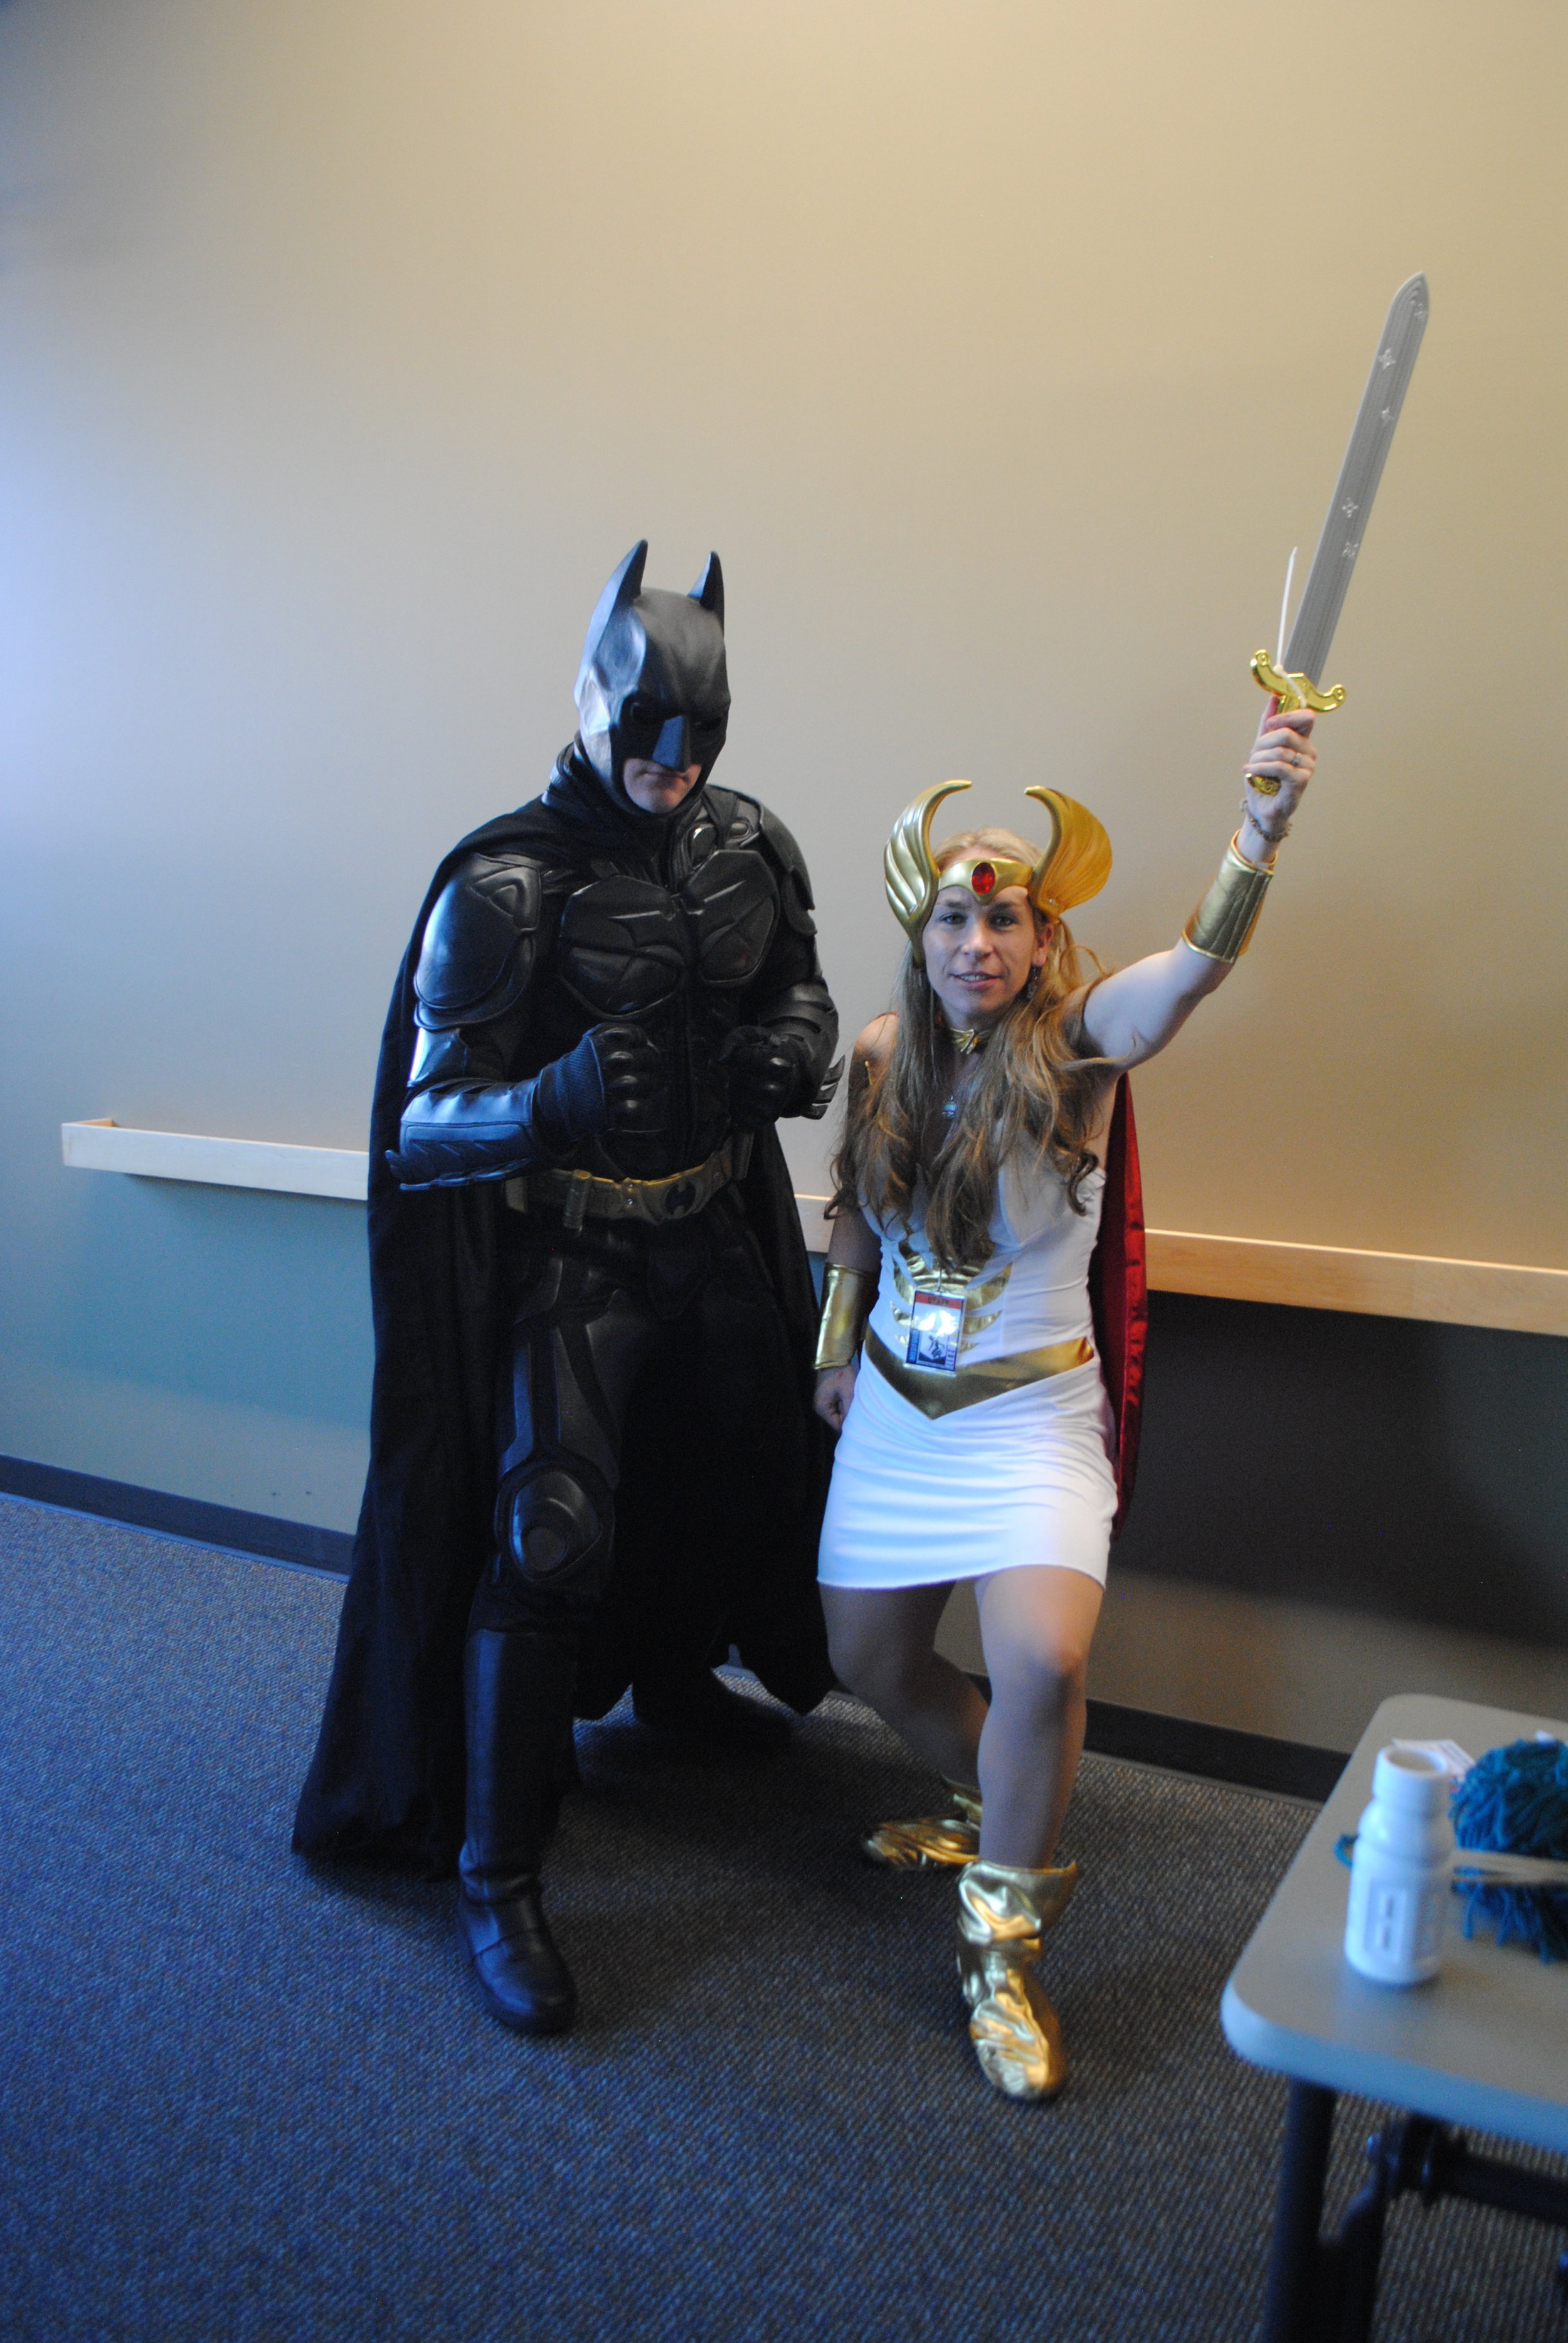 MEDFORD COMIC-CON 2017 - What to do in Southern Oregon - Medford - Jackson County Library Services - Rogue Community College - Friends of the Medford Library